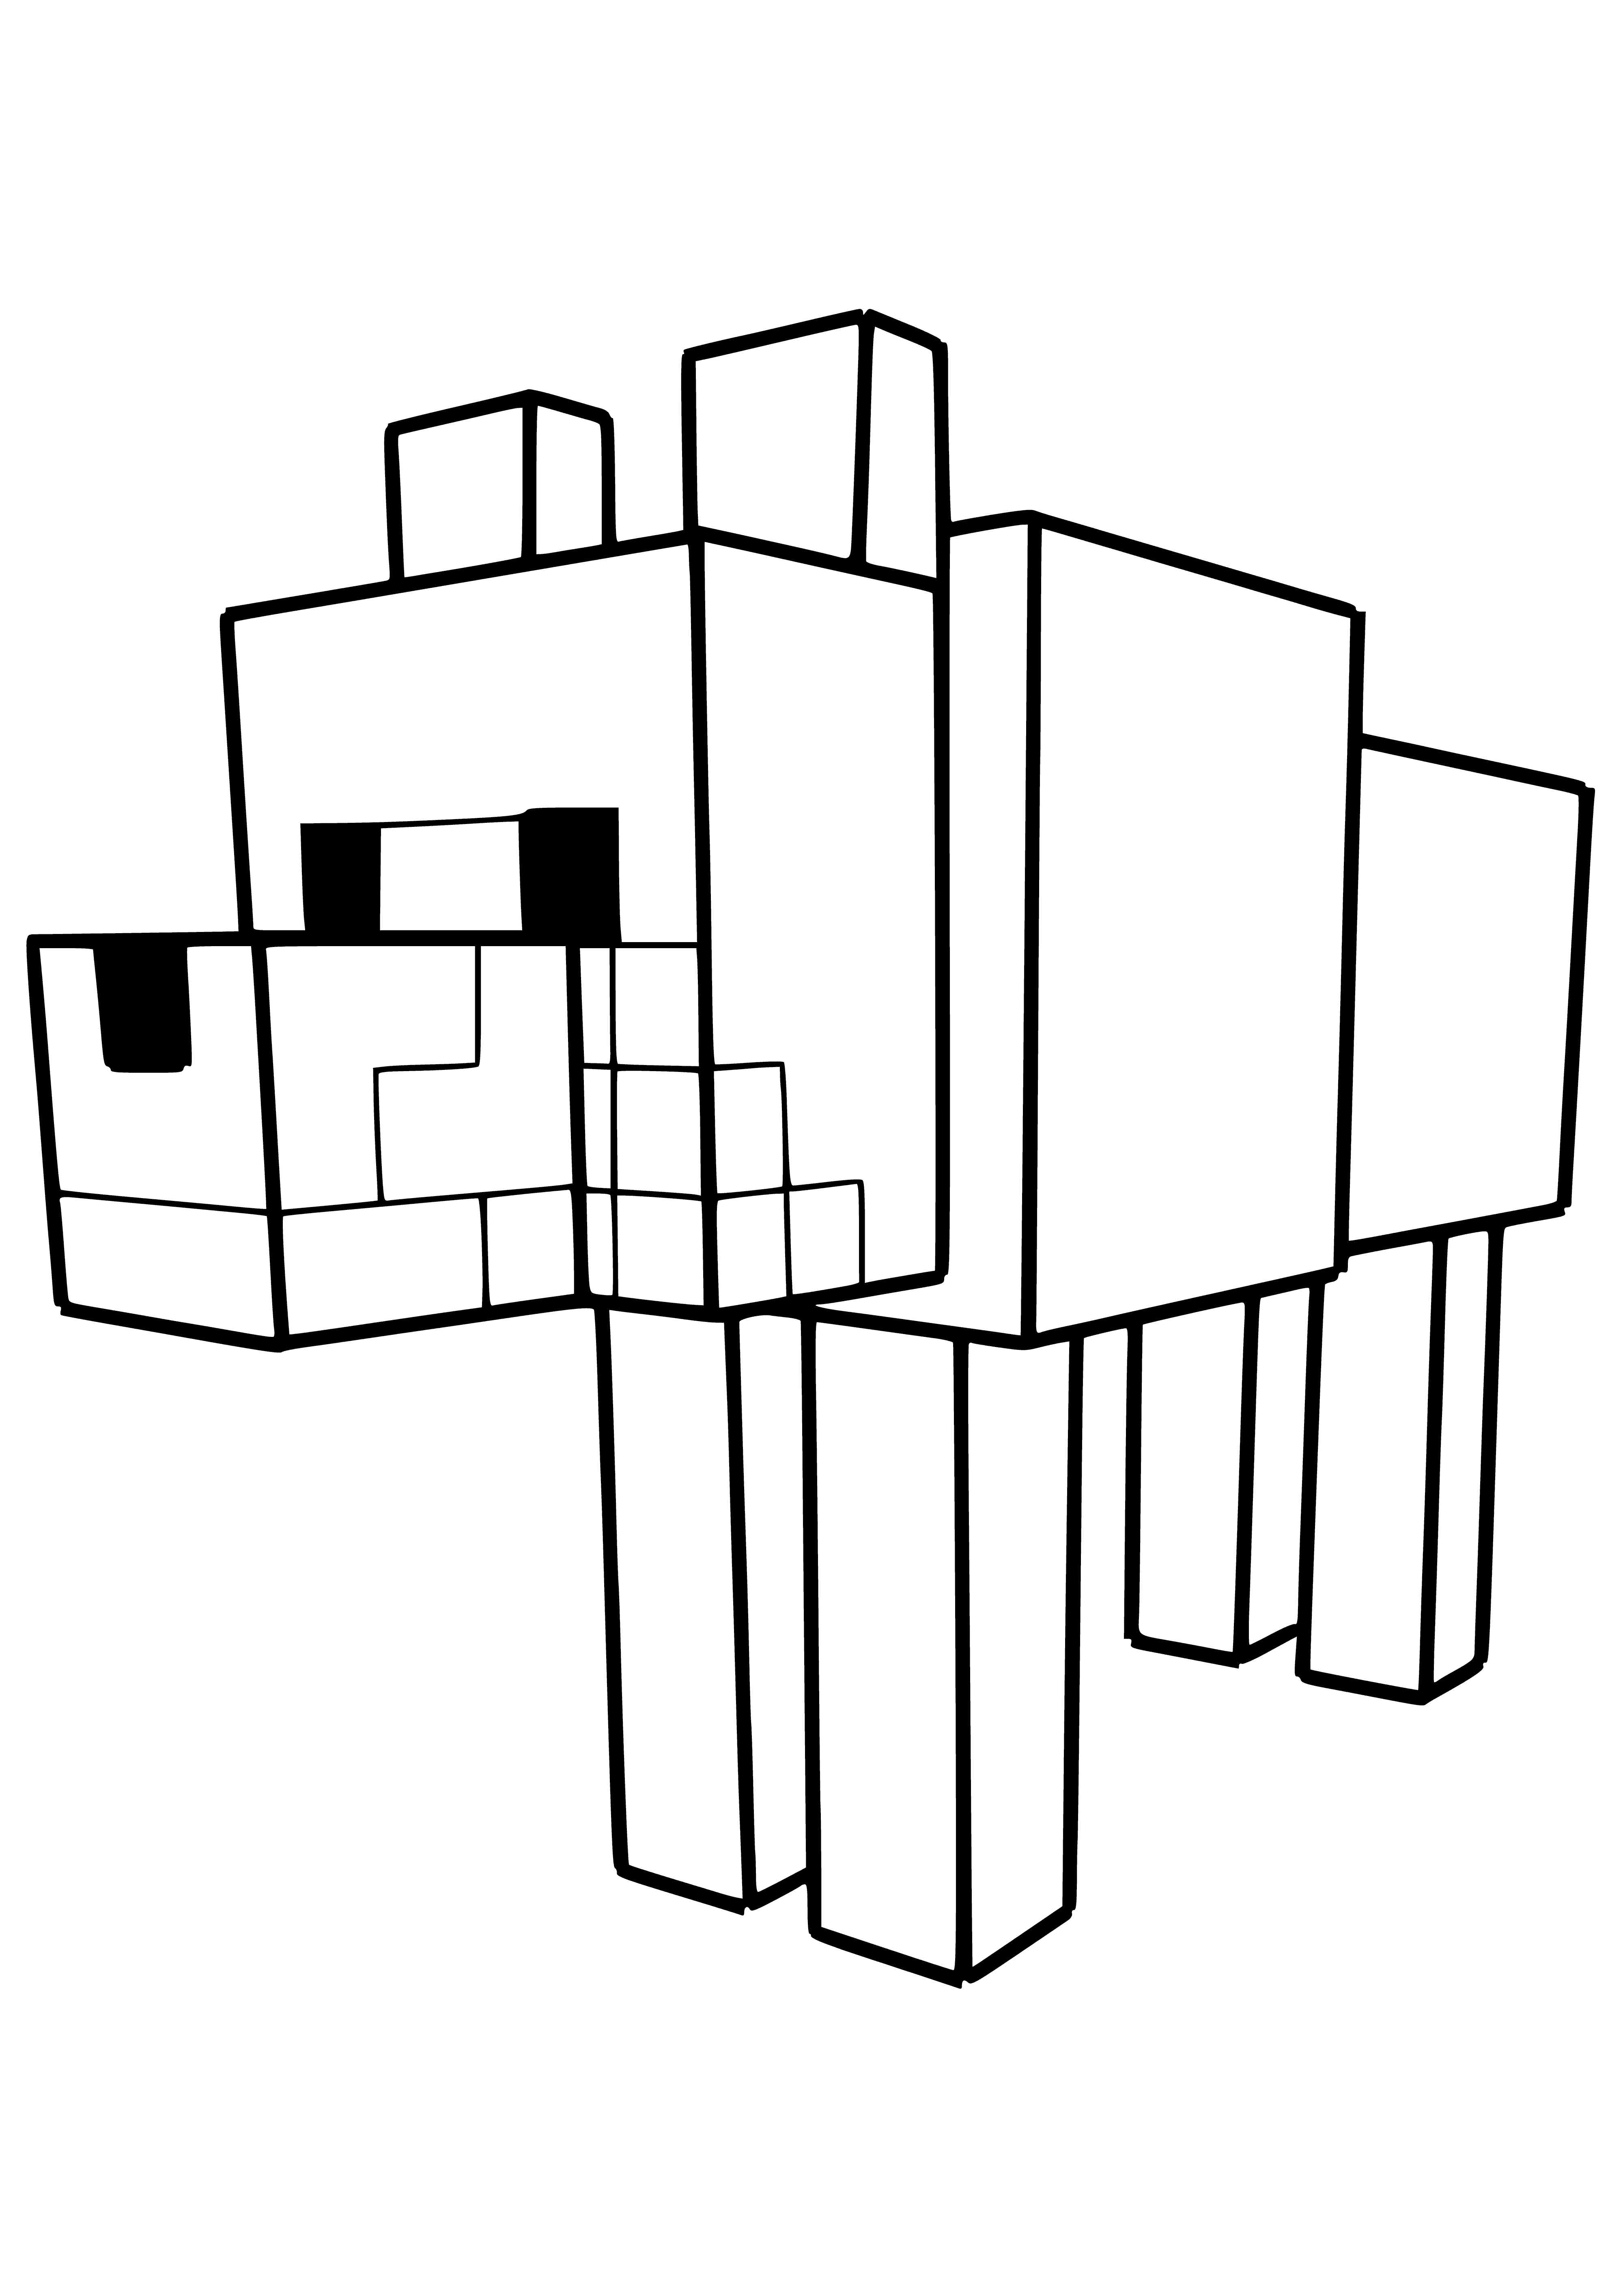 coloring page: A Minecraft dog stands in a grassy field, brown & white w/ black nose, a collar around its neck.